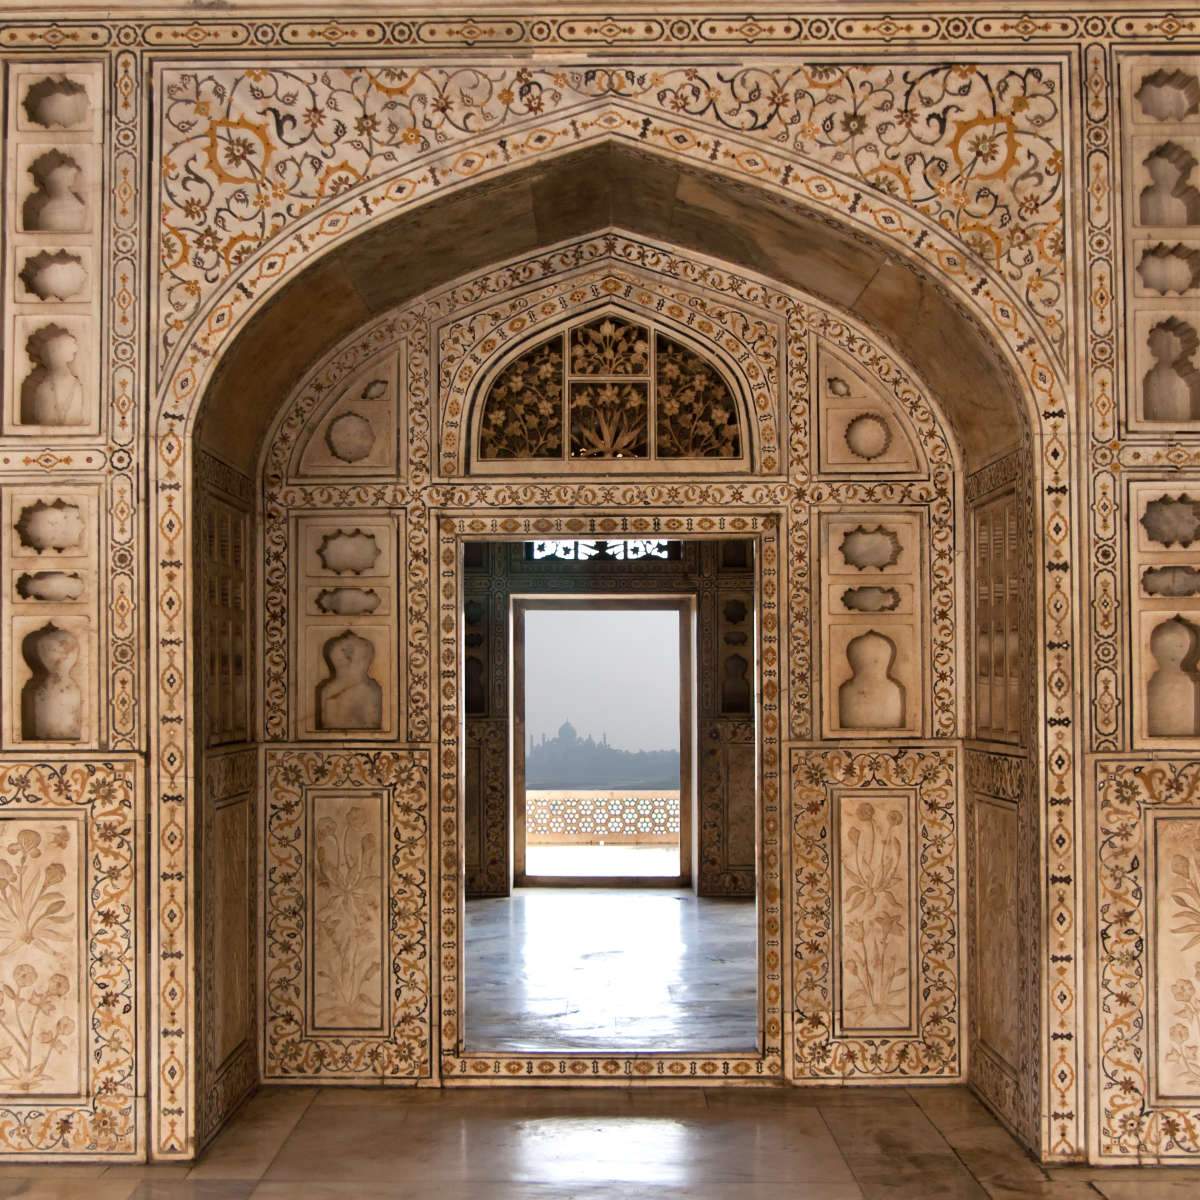 Agra Fort Wall Art